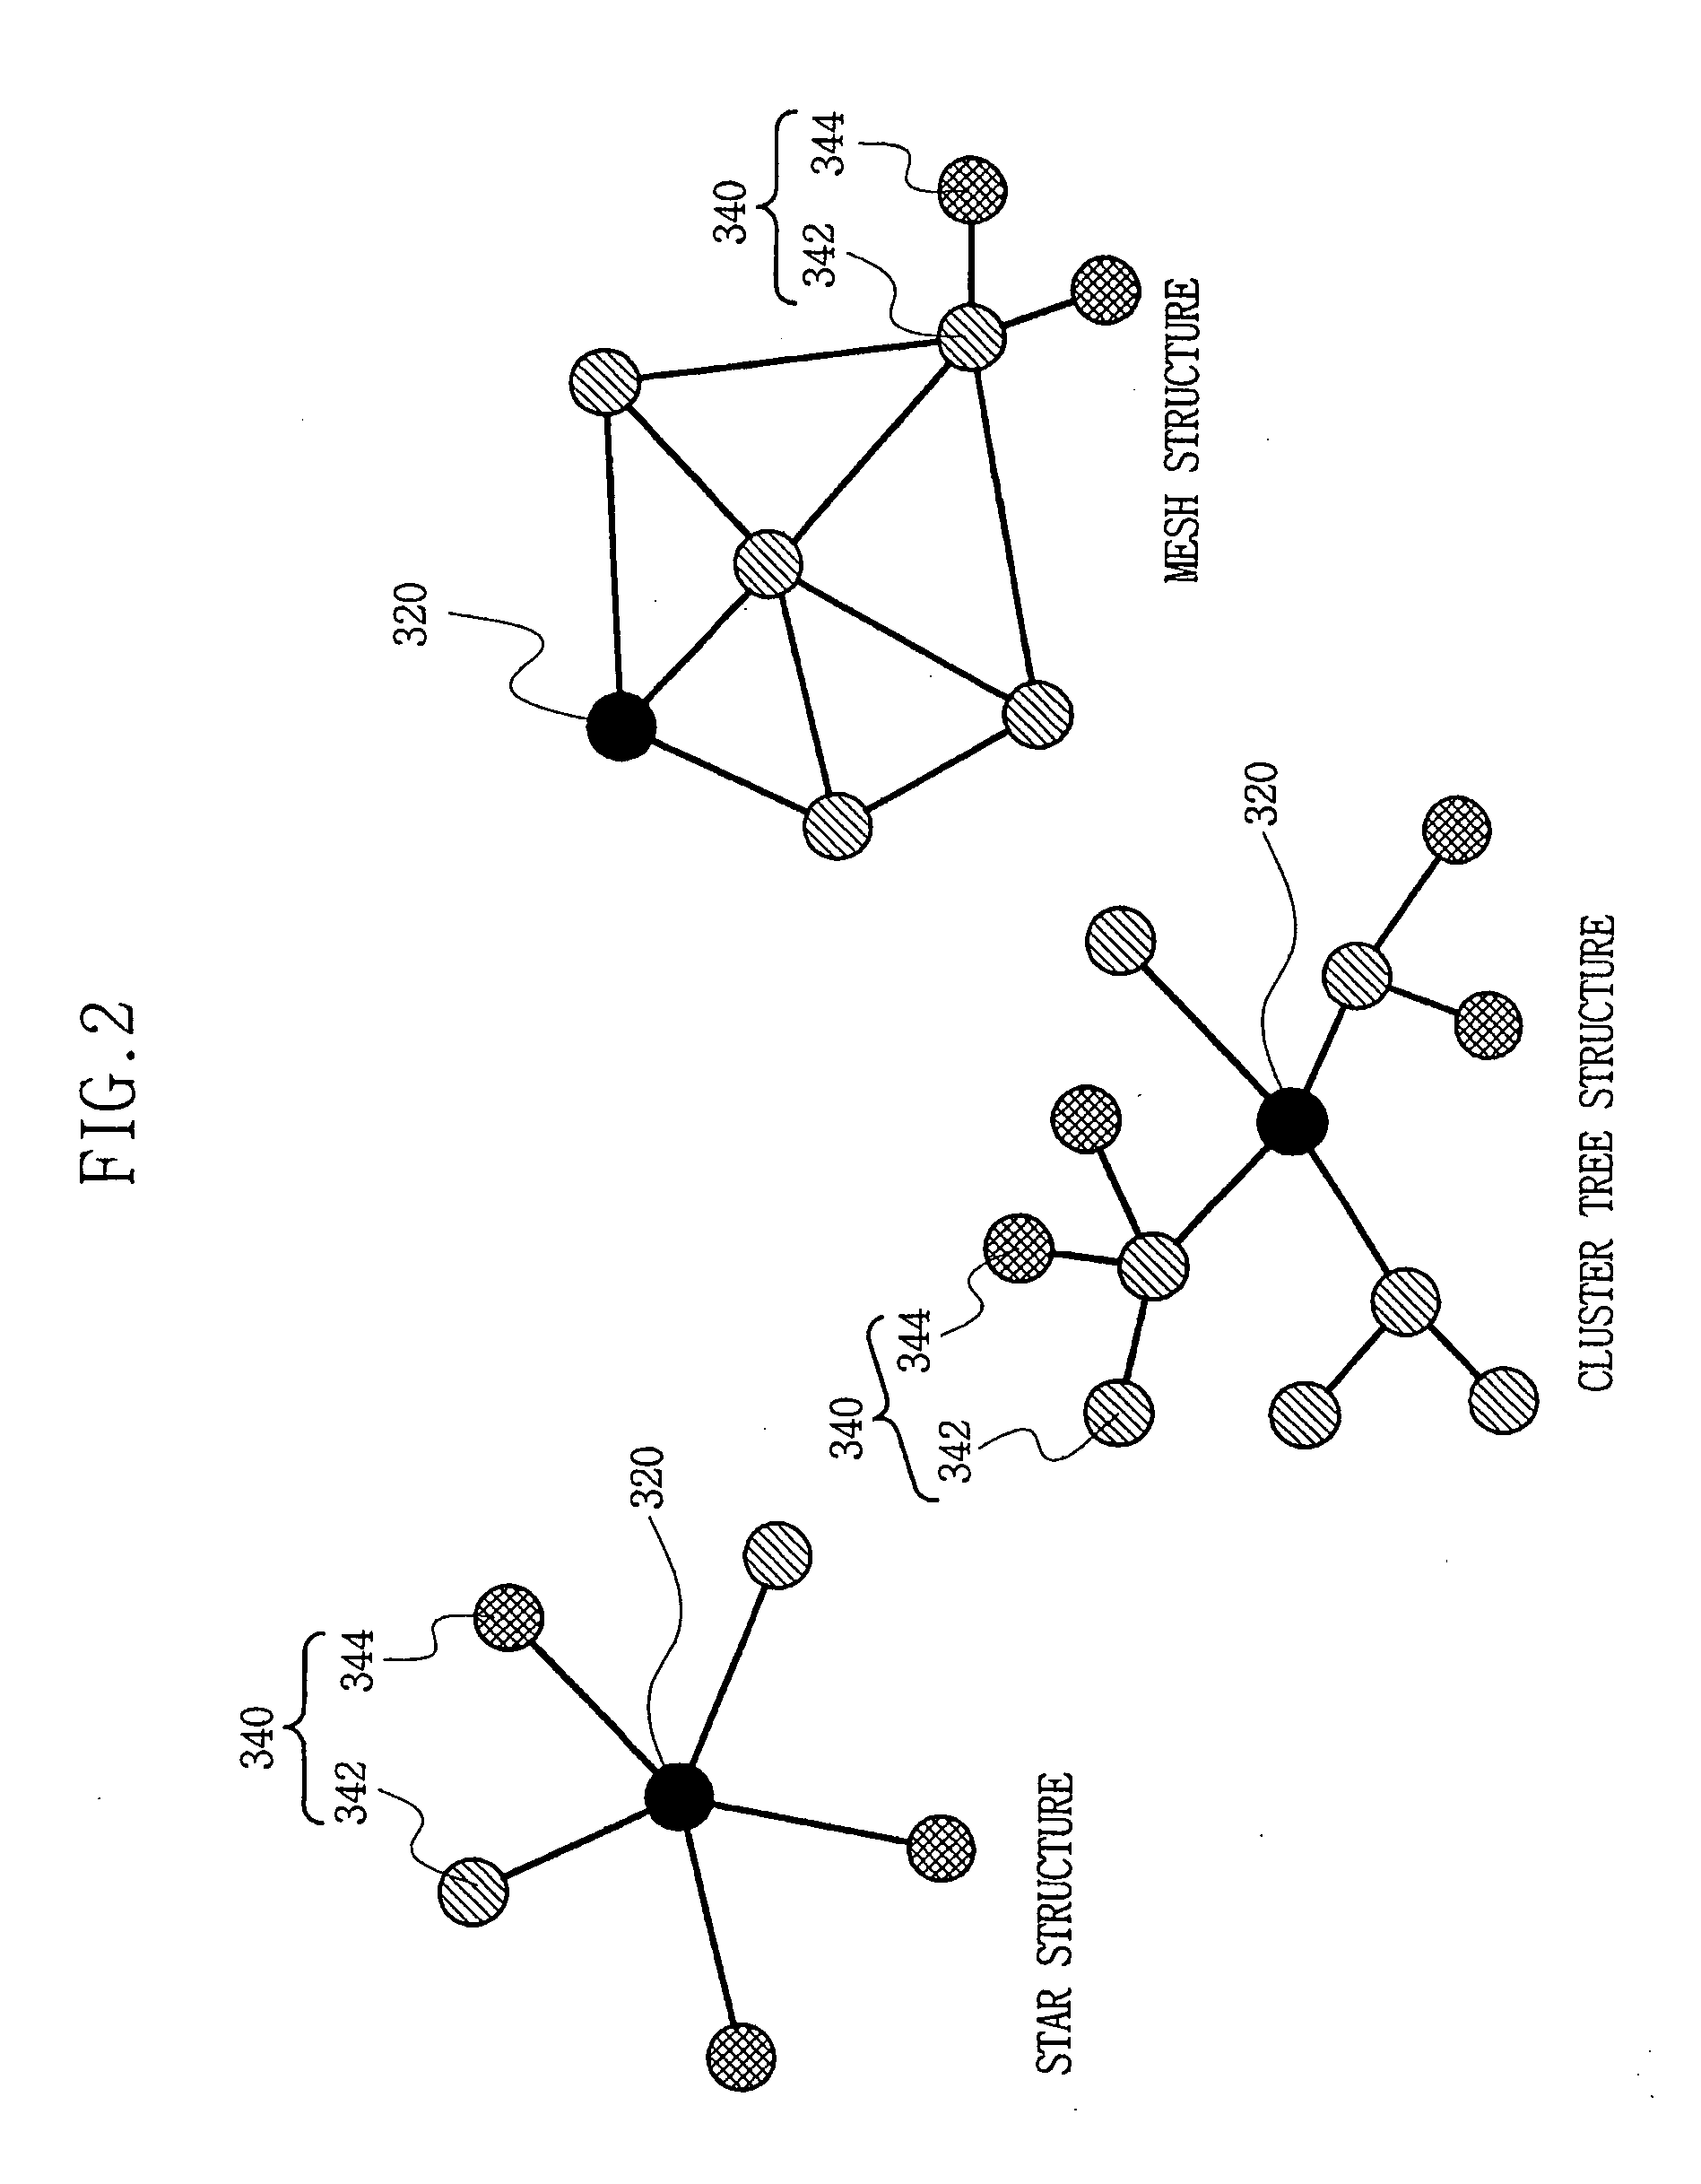 Management system for semiconductor manufacturing equipment